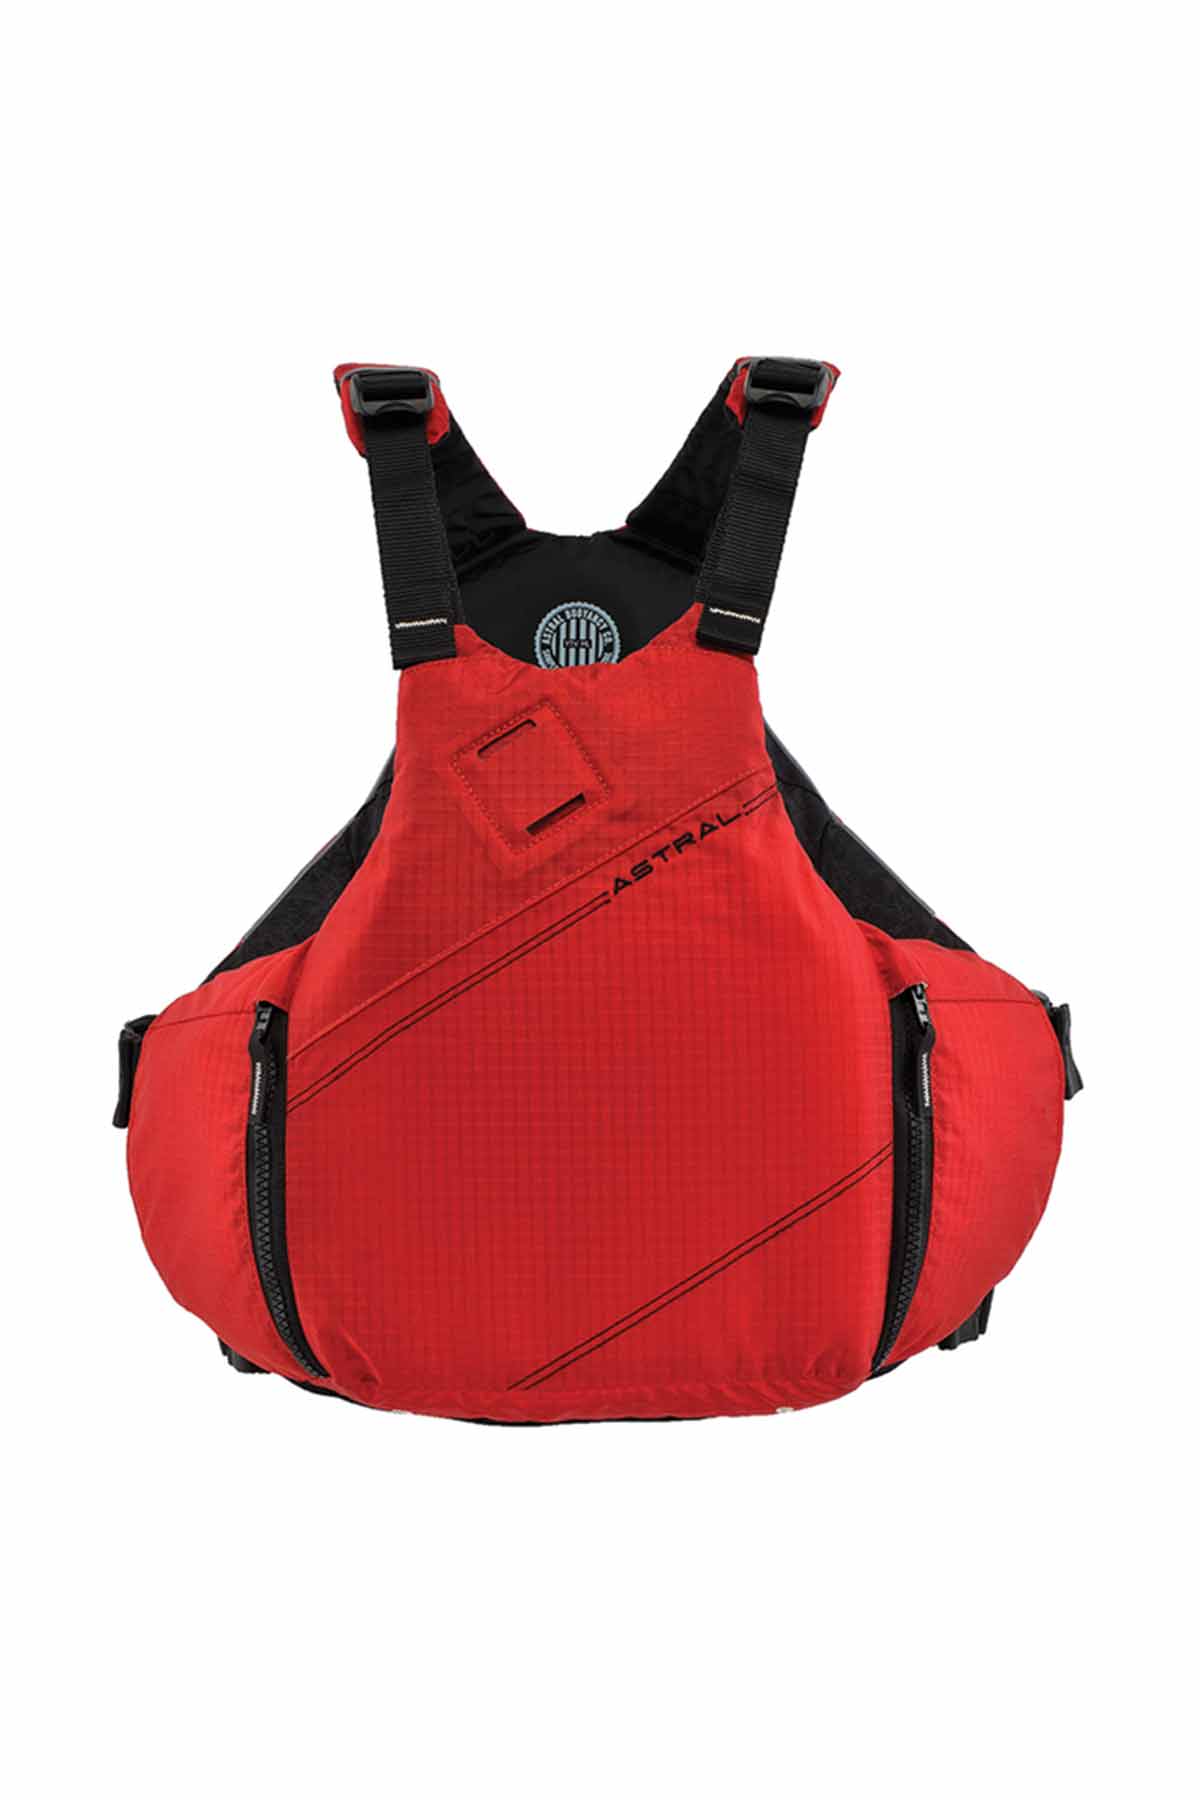 Astral Whitewater YTV PFD Cherry Creek Red Front